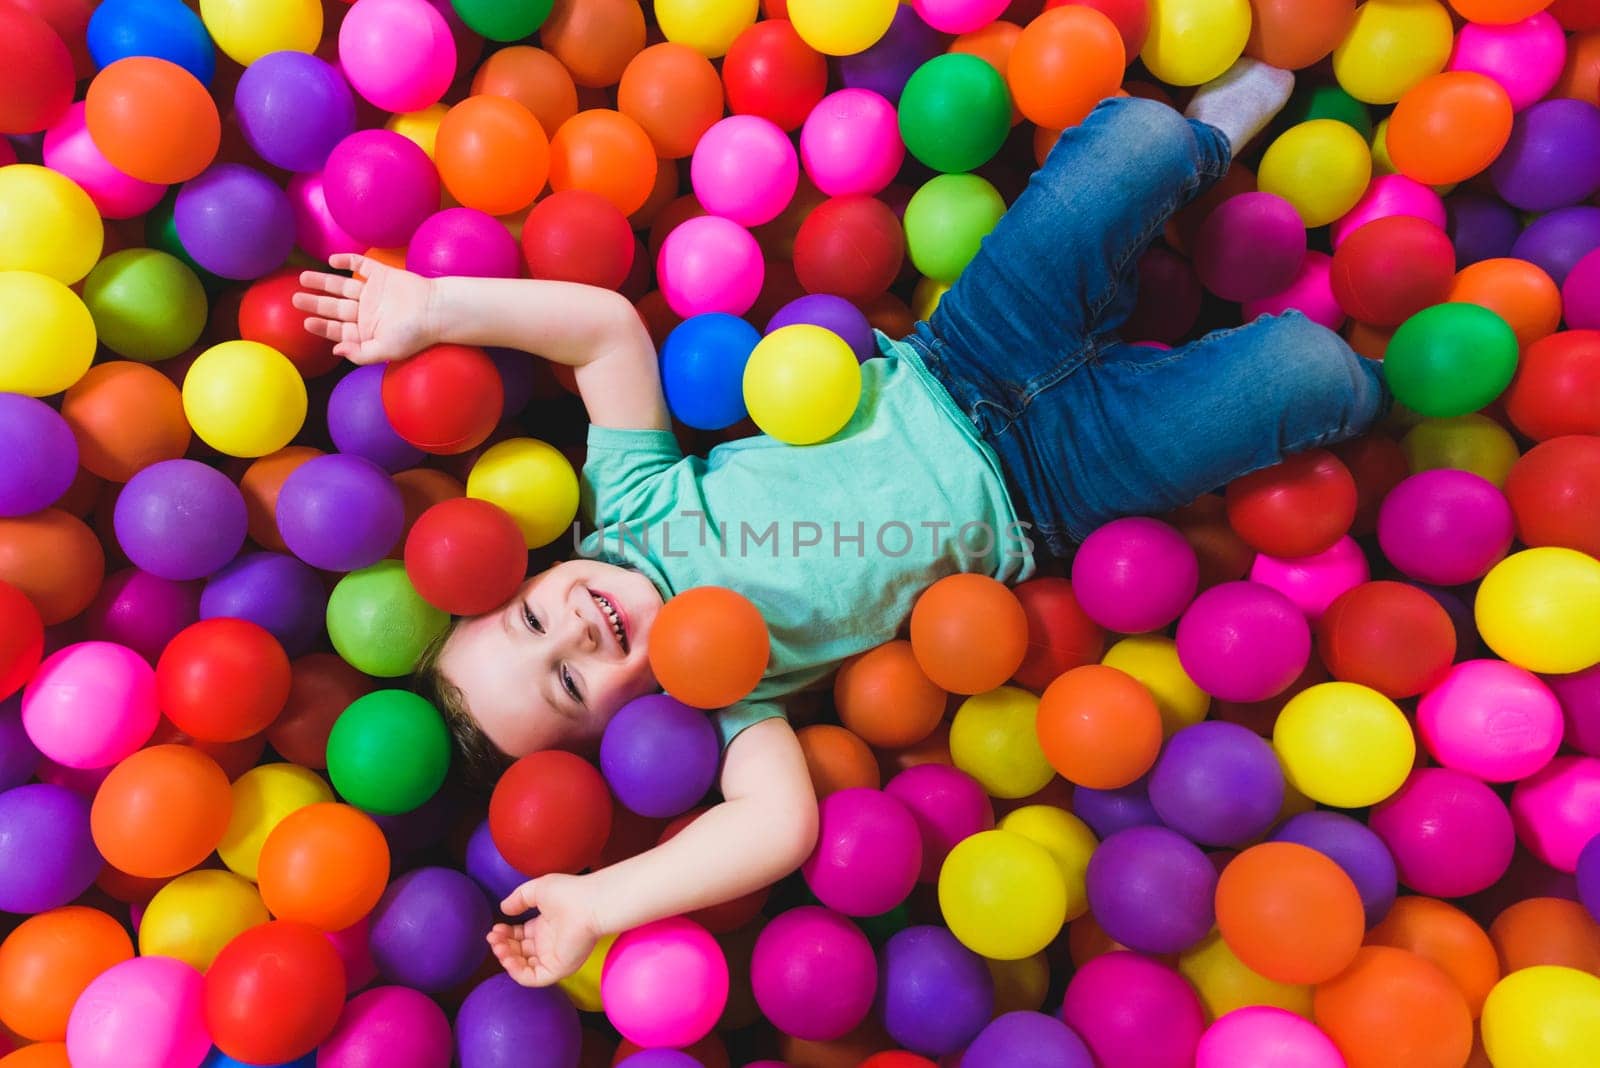 Smiling boy playing lying on colorful balls in the park by jcdiazhidalgo